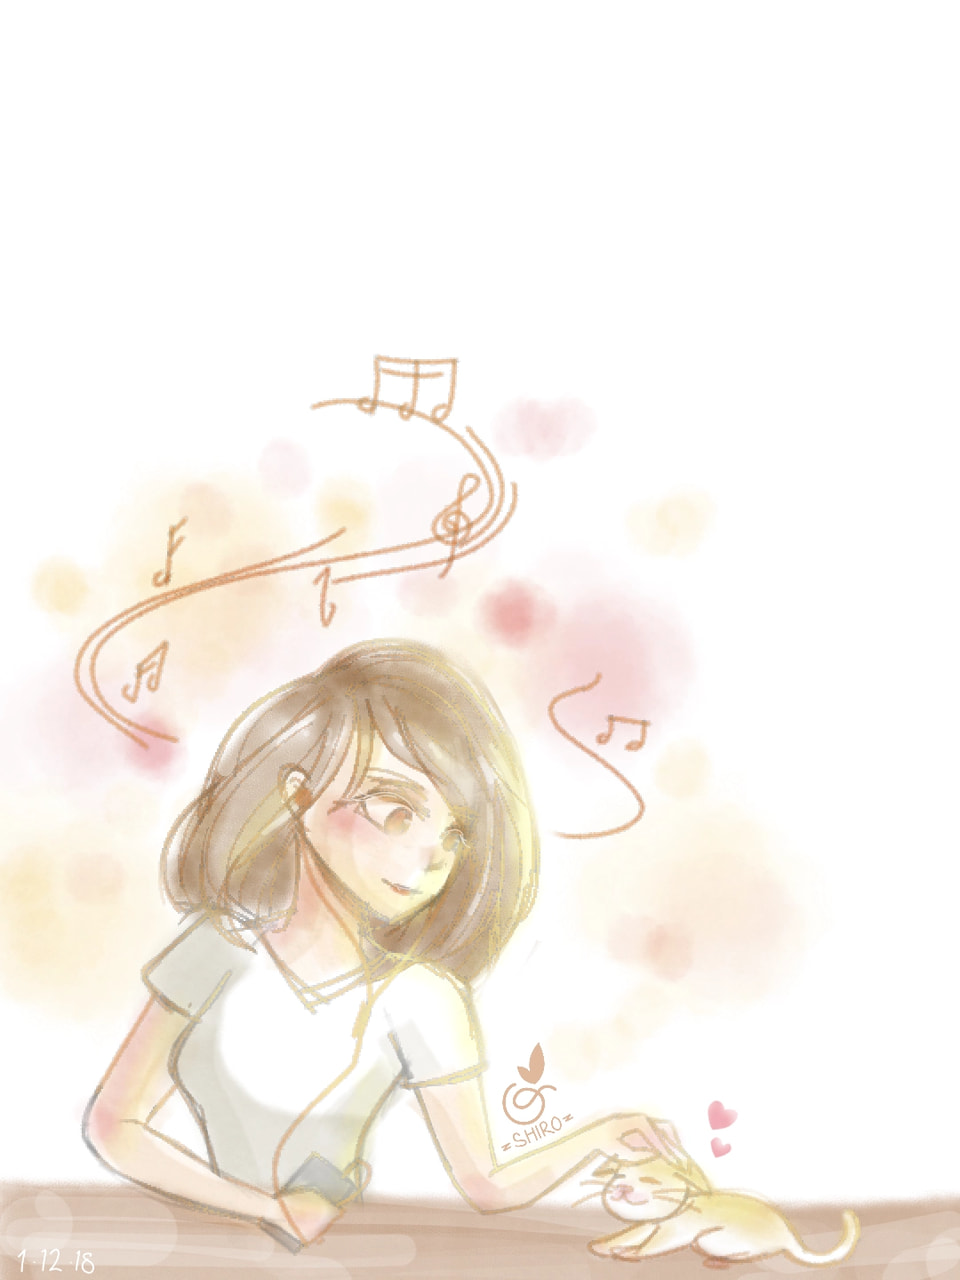 Music calms me down🎼🎶 #betterday #fridayswithsketch #girl #cute #cat #music #featured